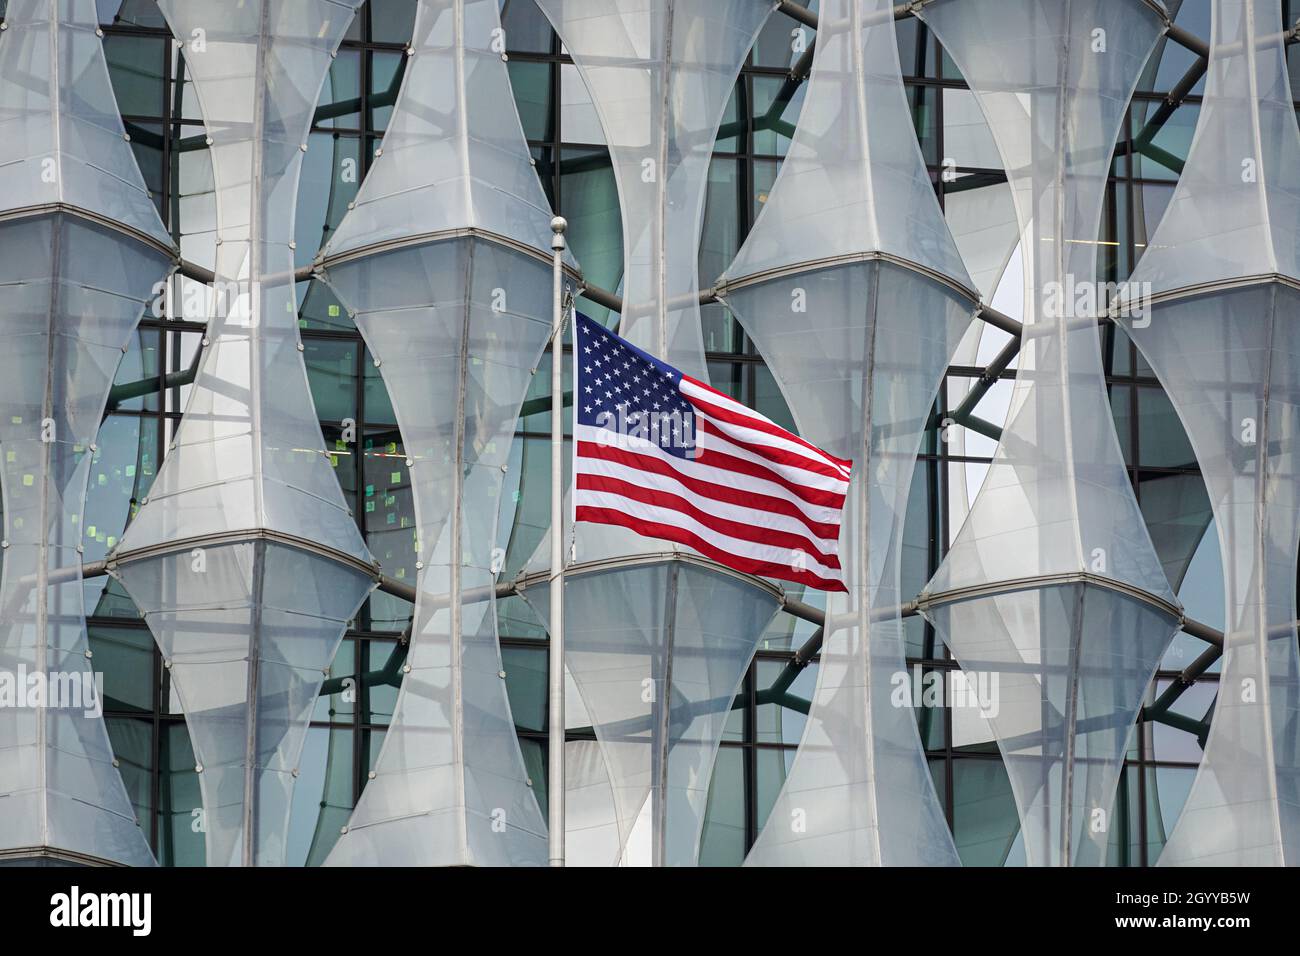 American flag at the Embassy of the United States of America in Nine Elms, London England United Kingdom UK Stock Photo